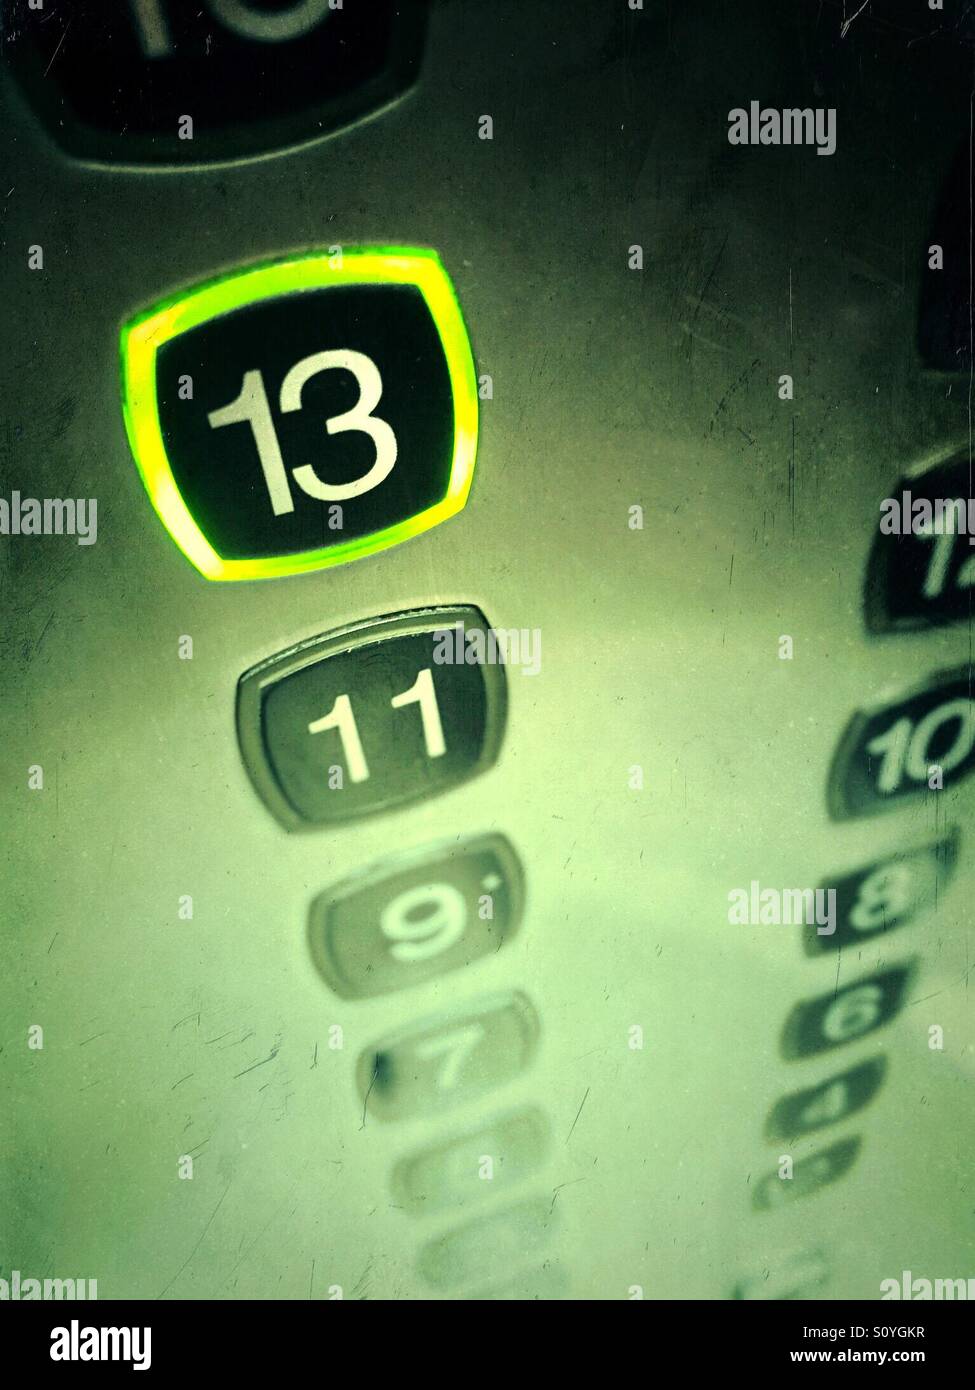 13th Floor Button Pushed In An Elevator Stock Photo 310392427 Alamy